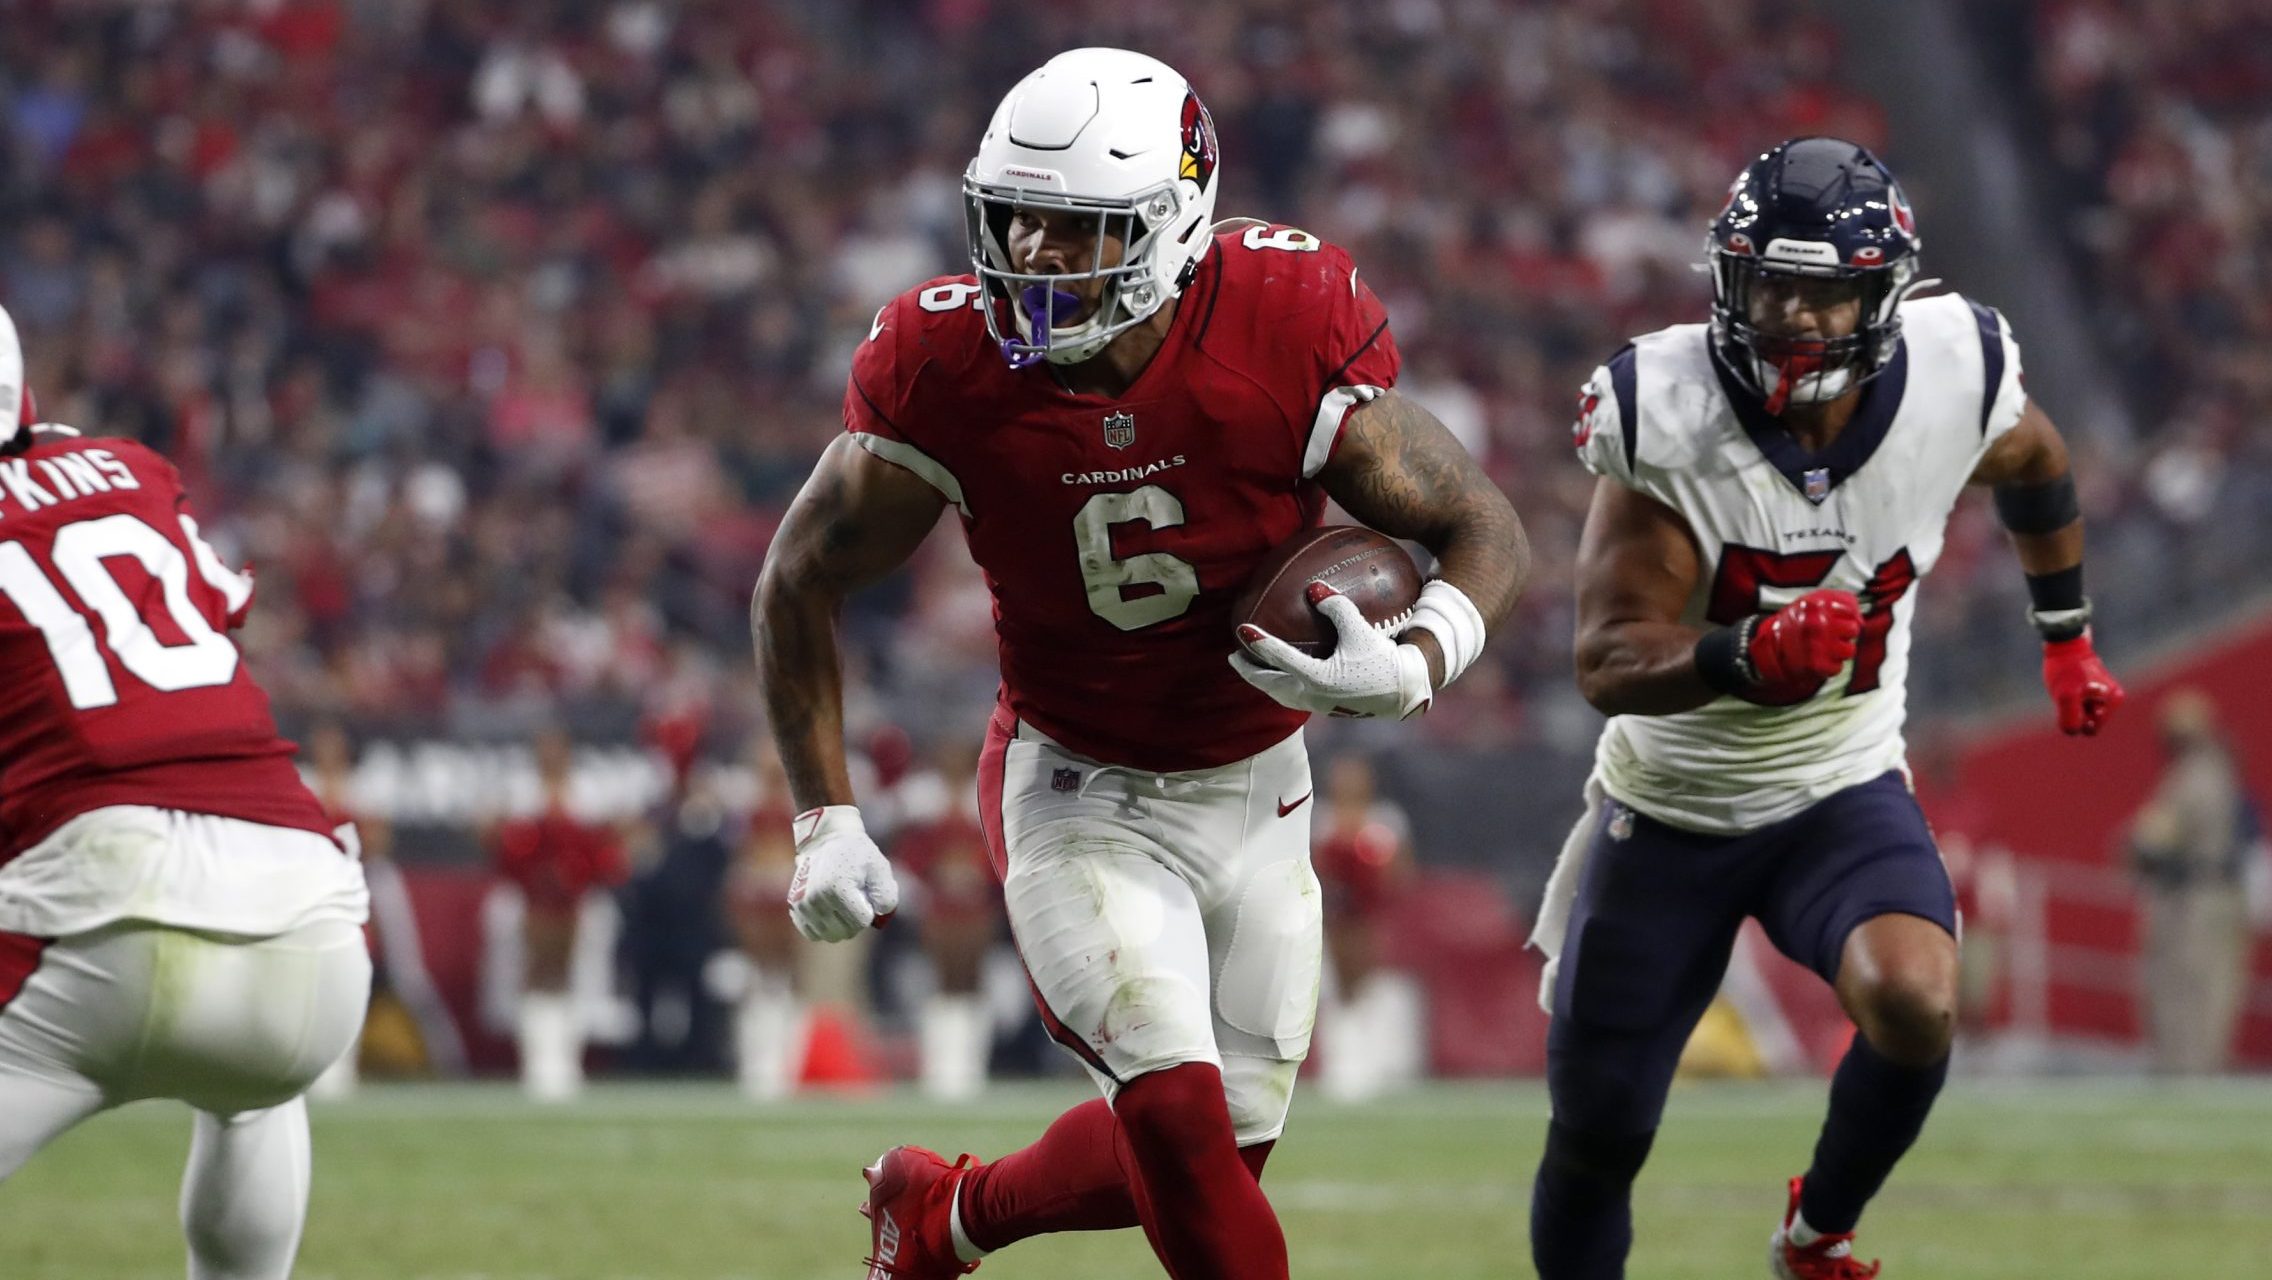 Running back James Conner #6 of the Arizona Cardinals scores a touchdown during the game against th...